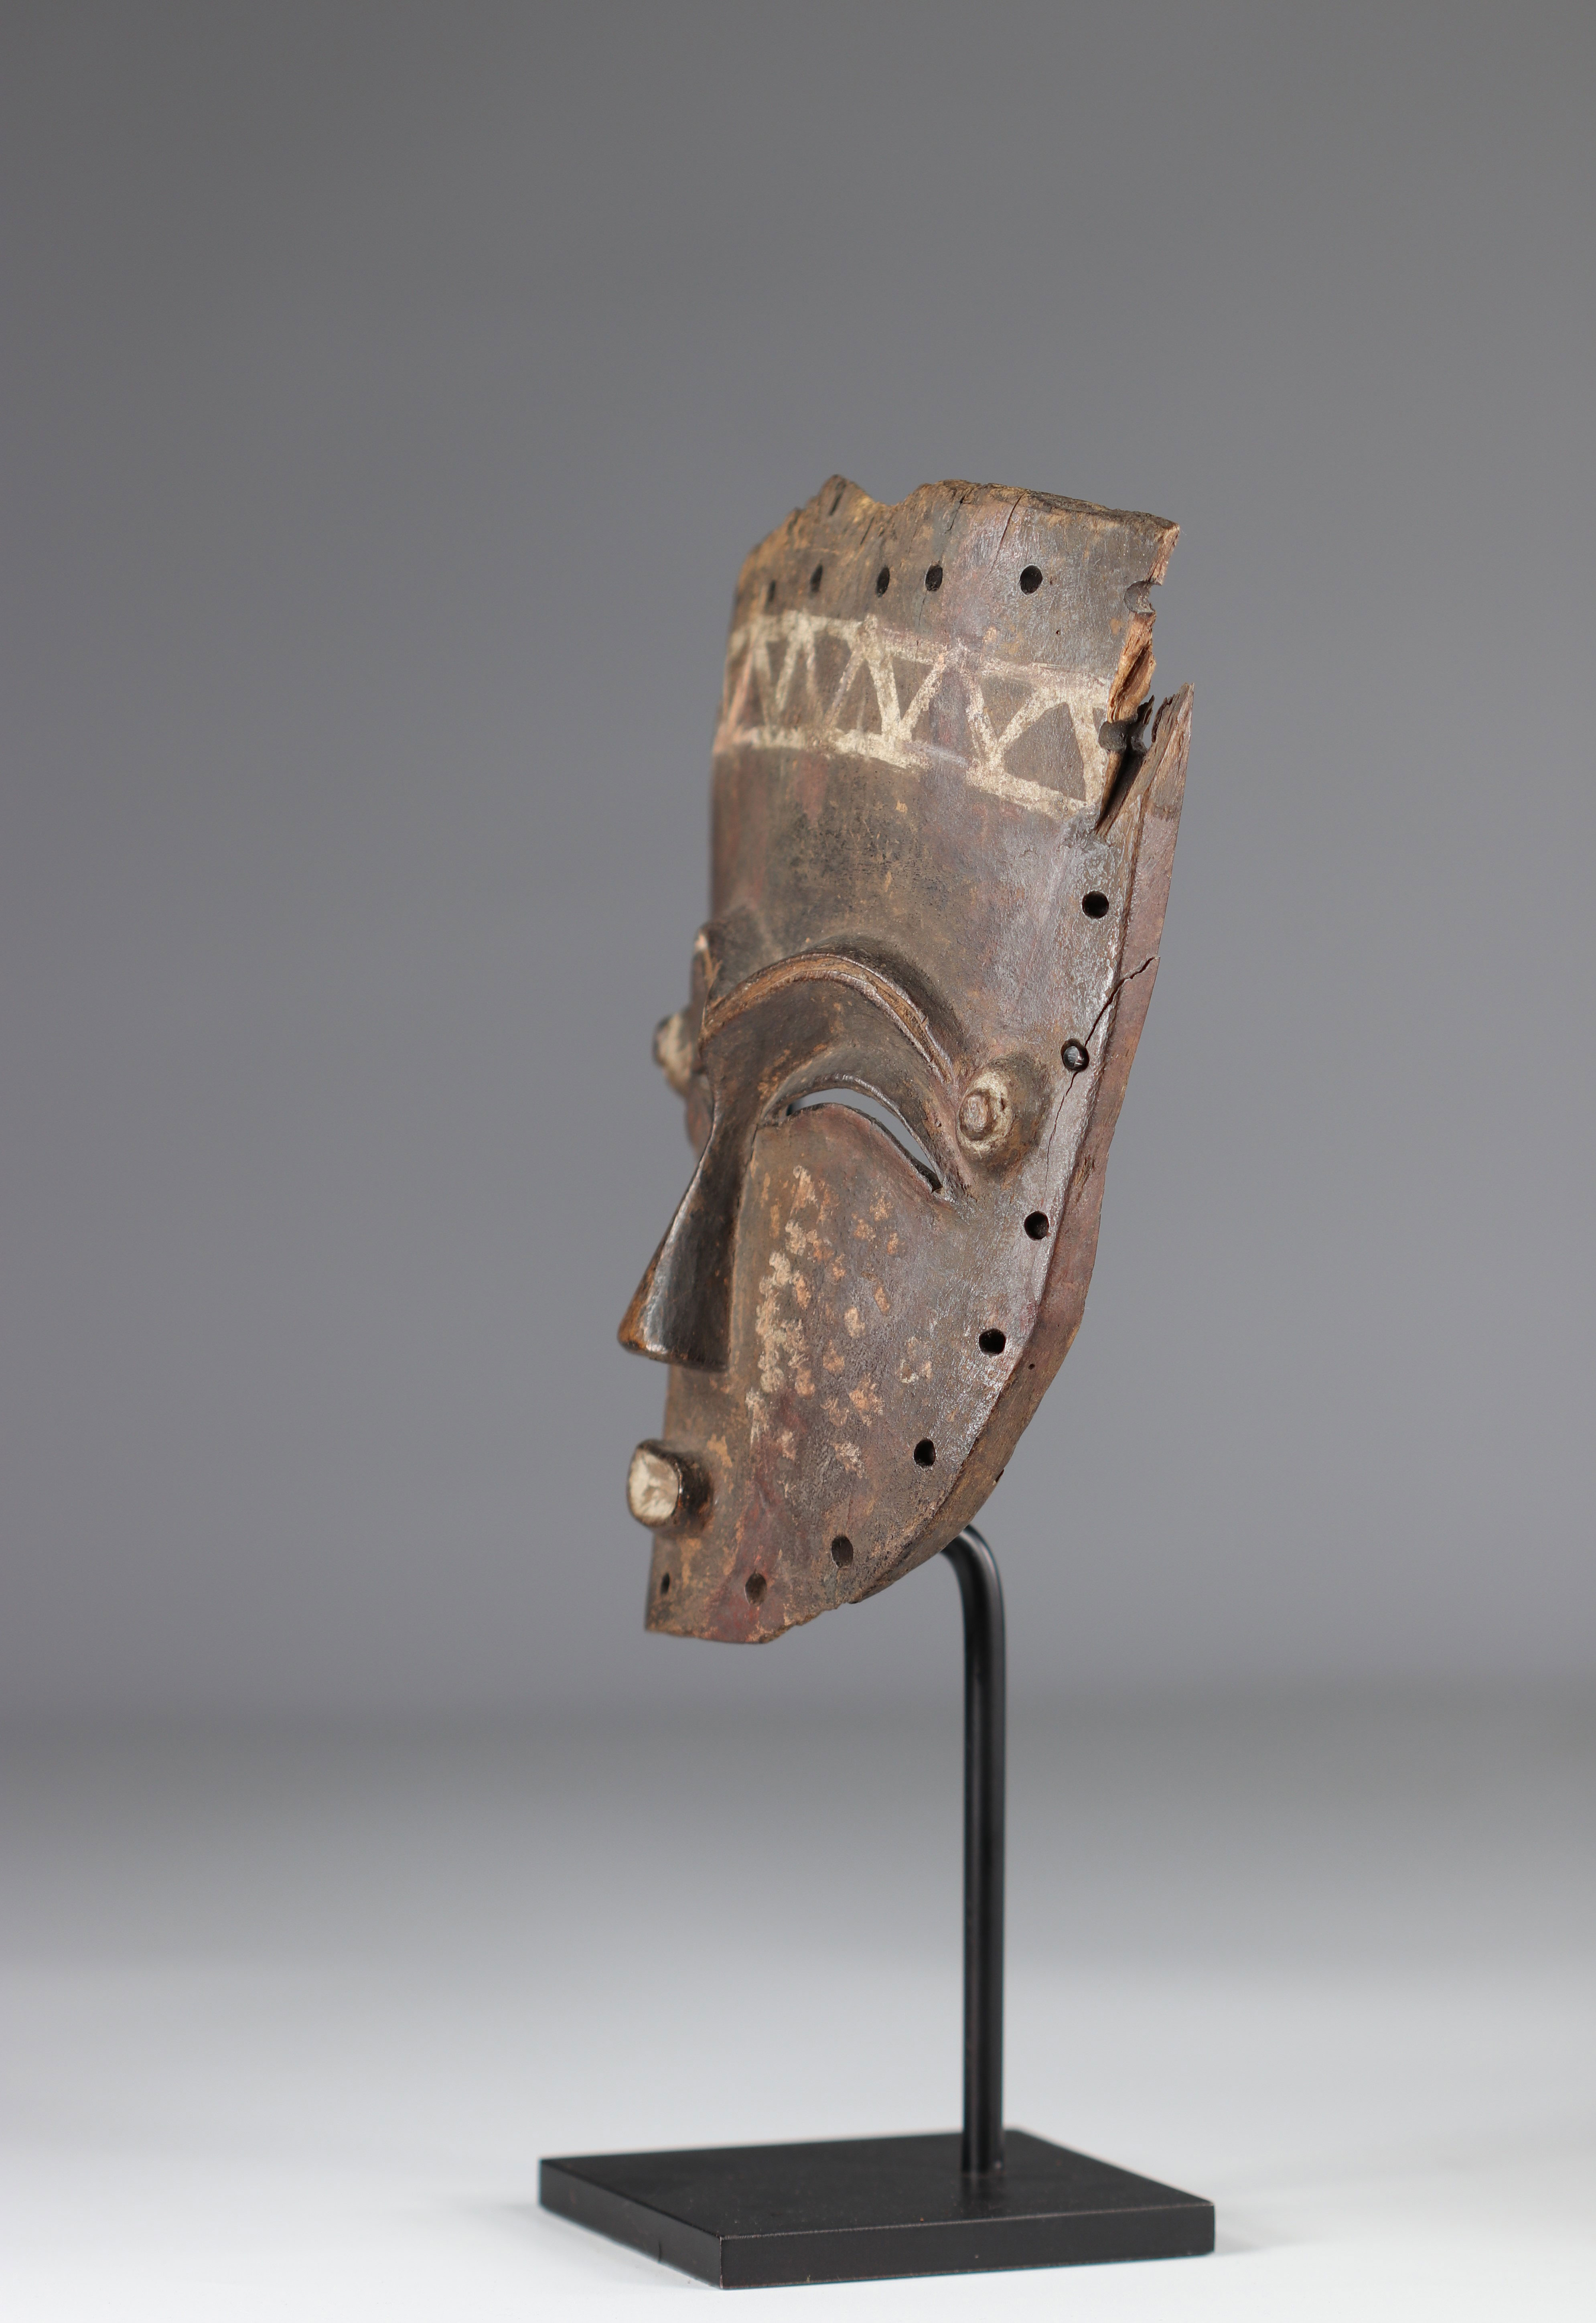 Rare and very old Lele mask - DRC, traces of use, natural pigments from the early 20th century - Image 4 of 5